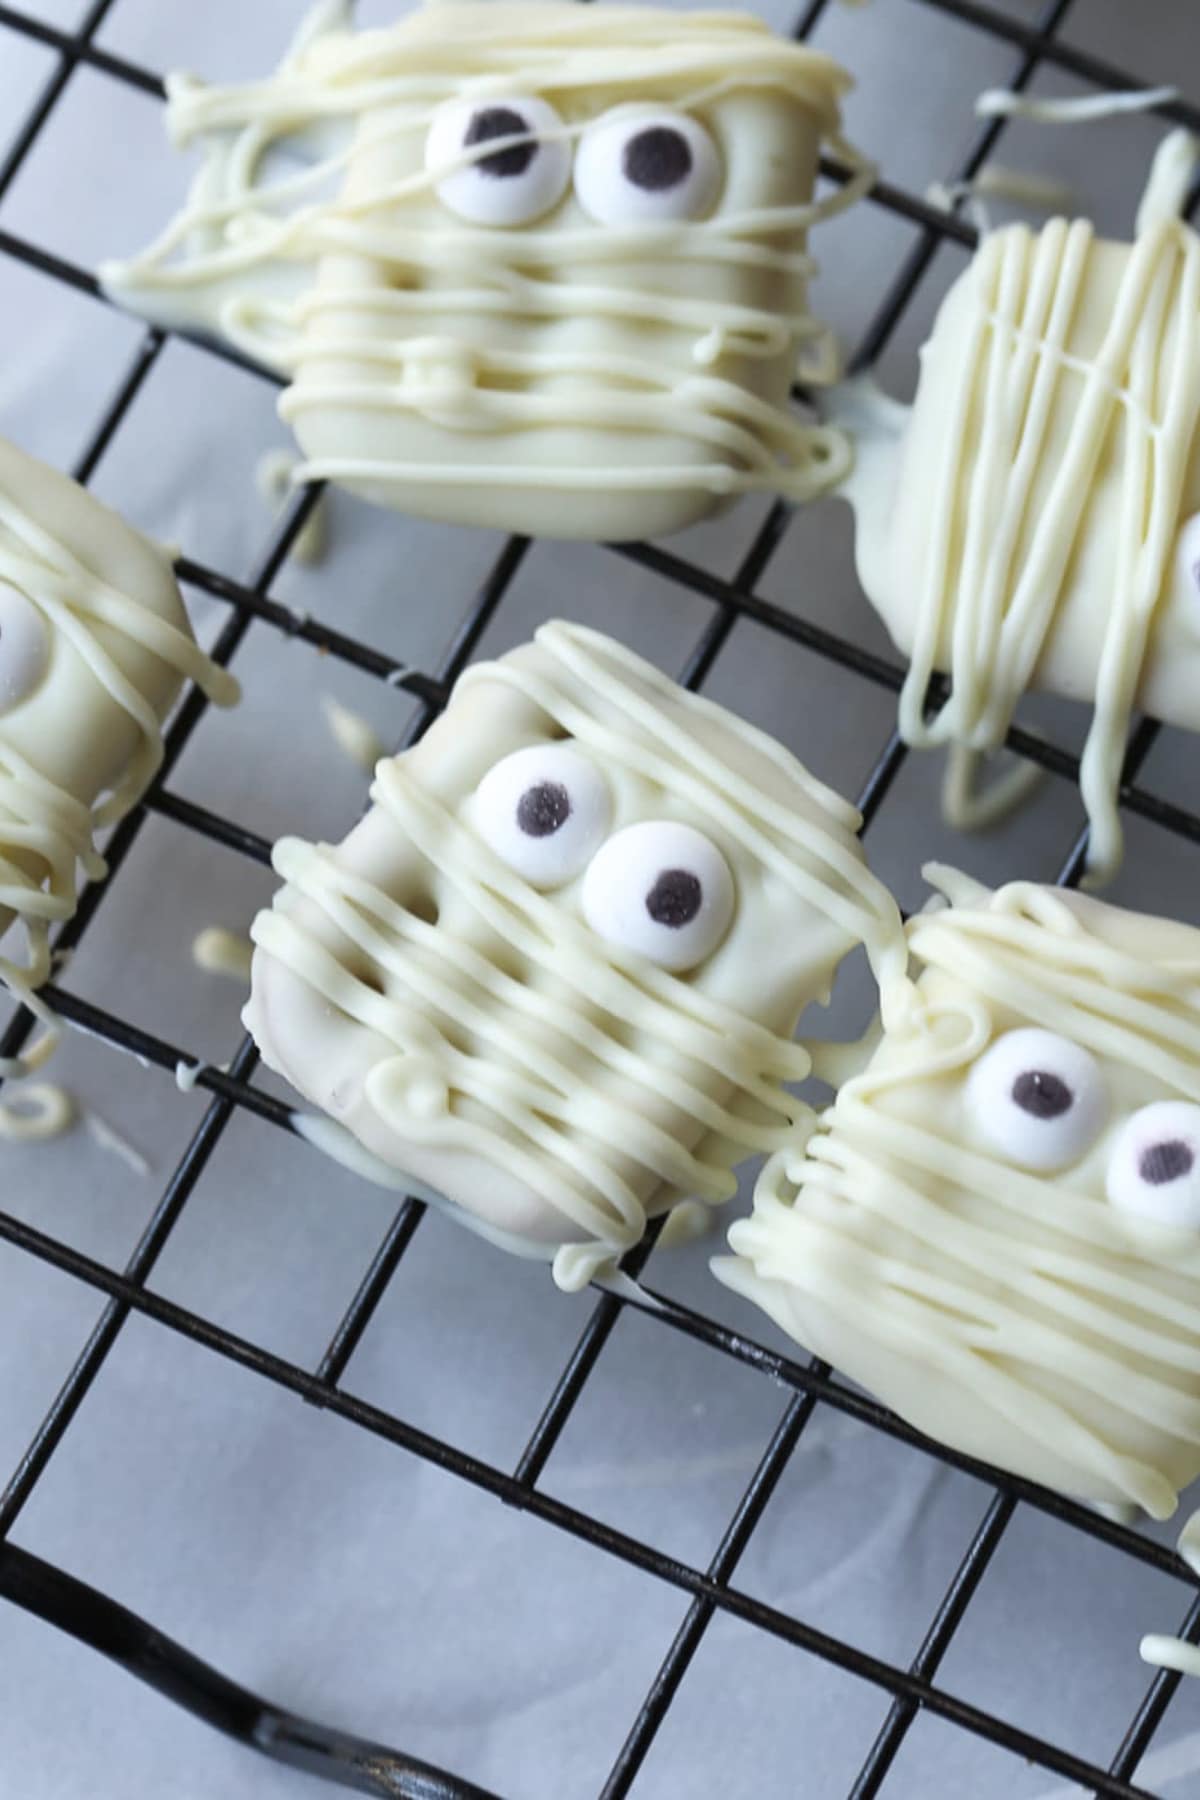 Square white chocolate pretzels with candy eyes and white chocolate drizzles made to look like mummies.